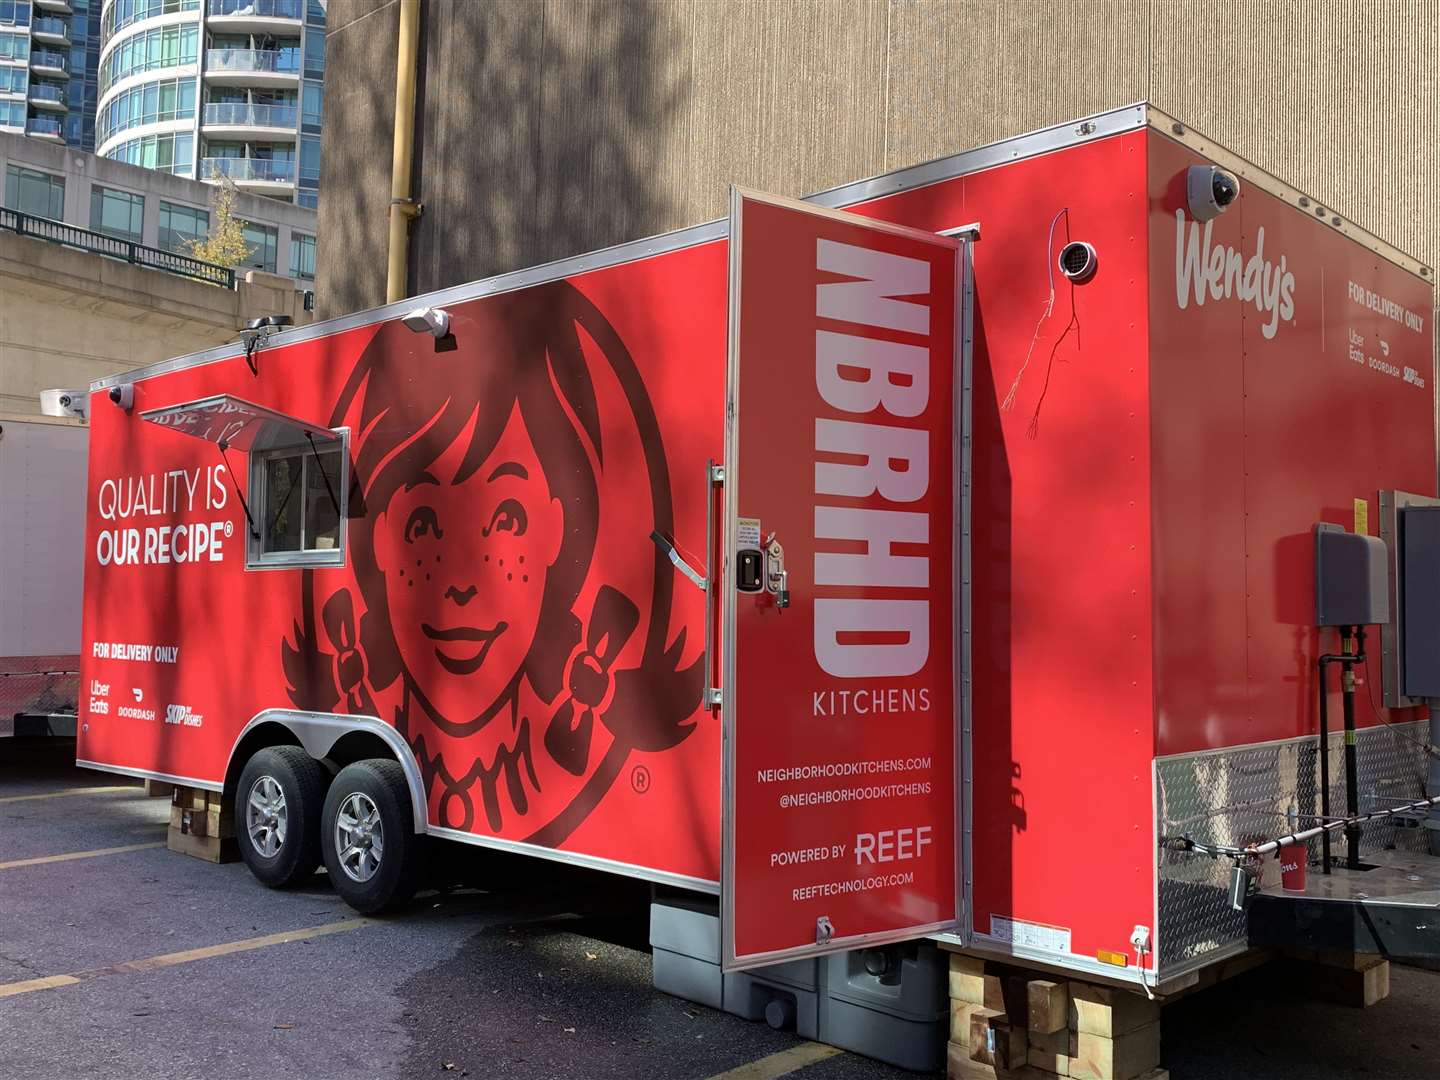 Wendy’s has set up mobile kitchens across London to offer food for delivery (Wendys/PA)